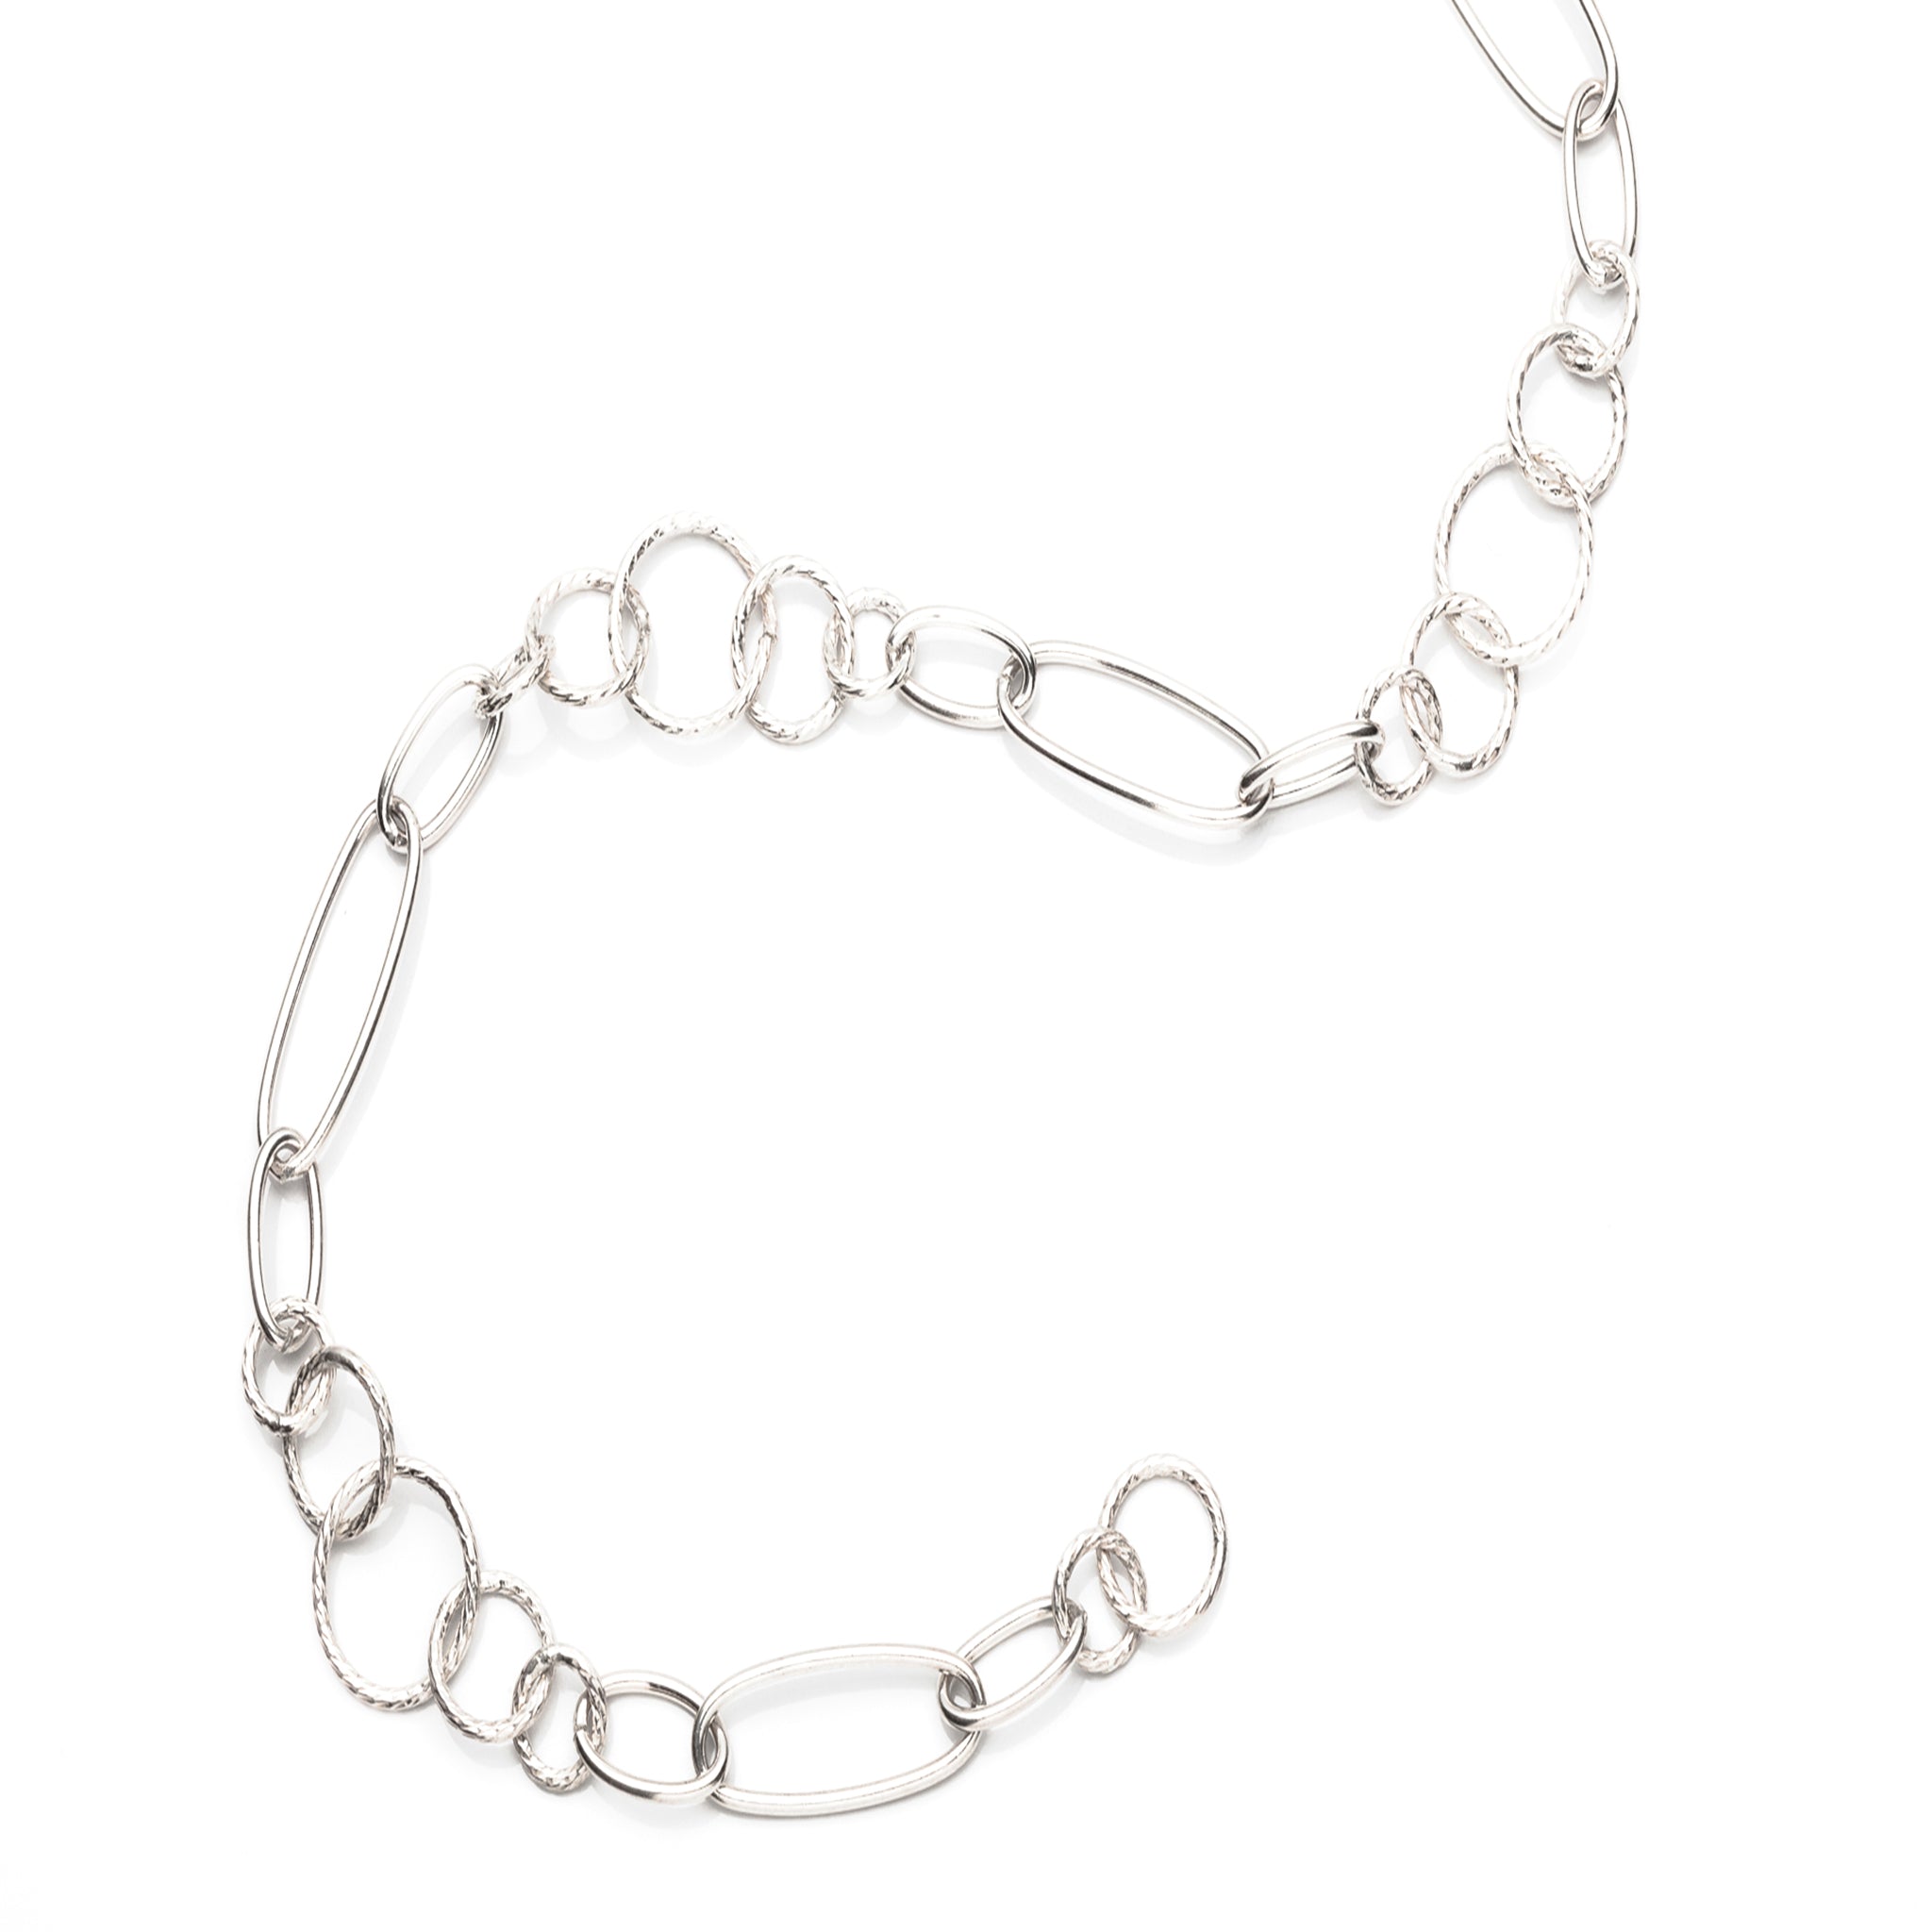 Handmade Alternating Round and Oval Cable Chain in Sterling Silver